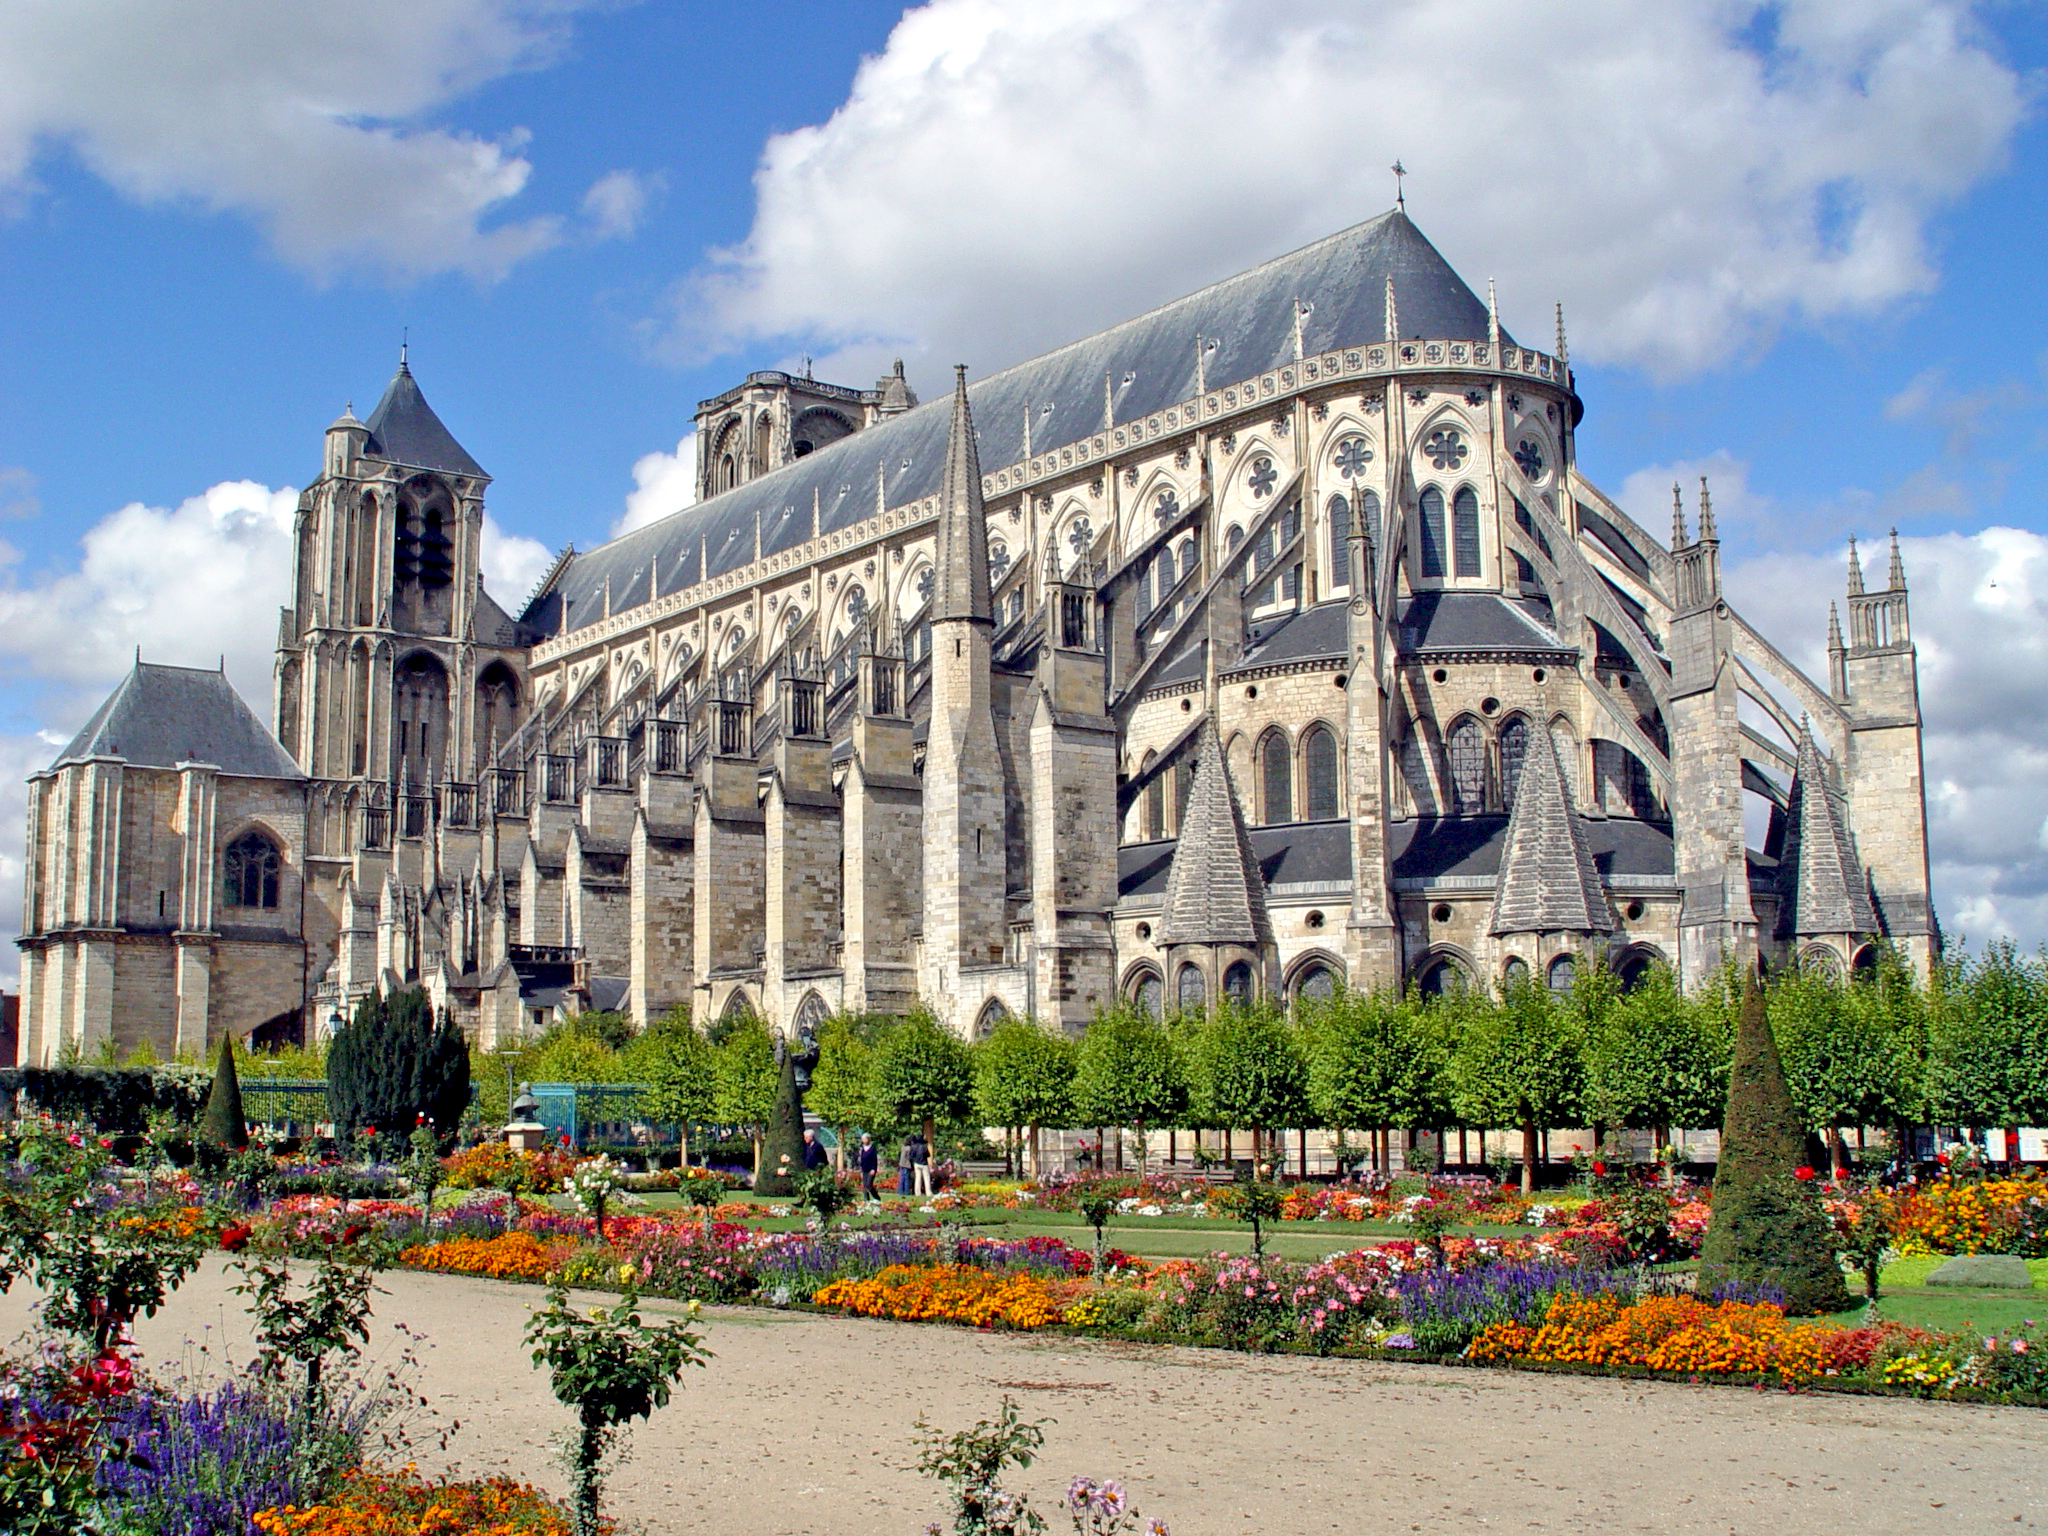 Bourges Cathedral by Renaud MAVRÉ (public domain) from Wikimedia Commons